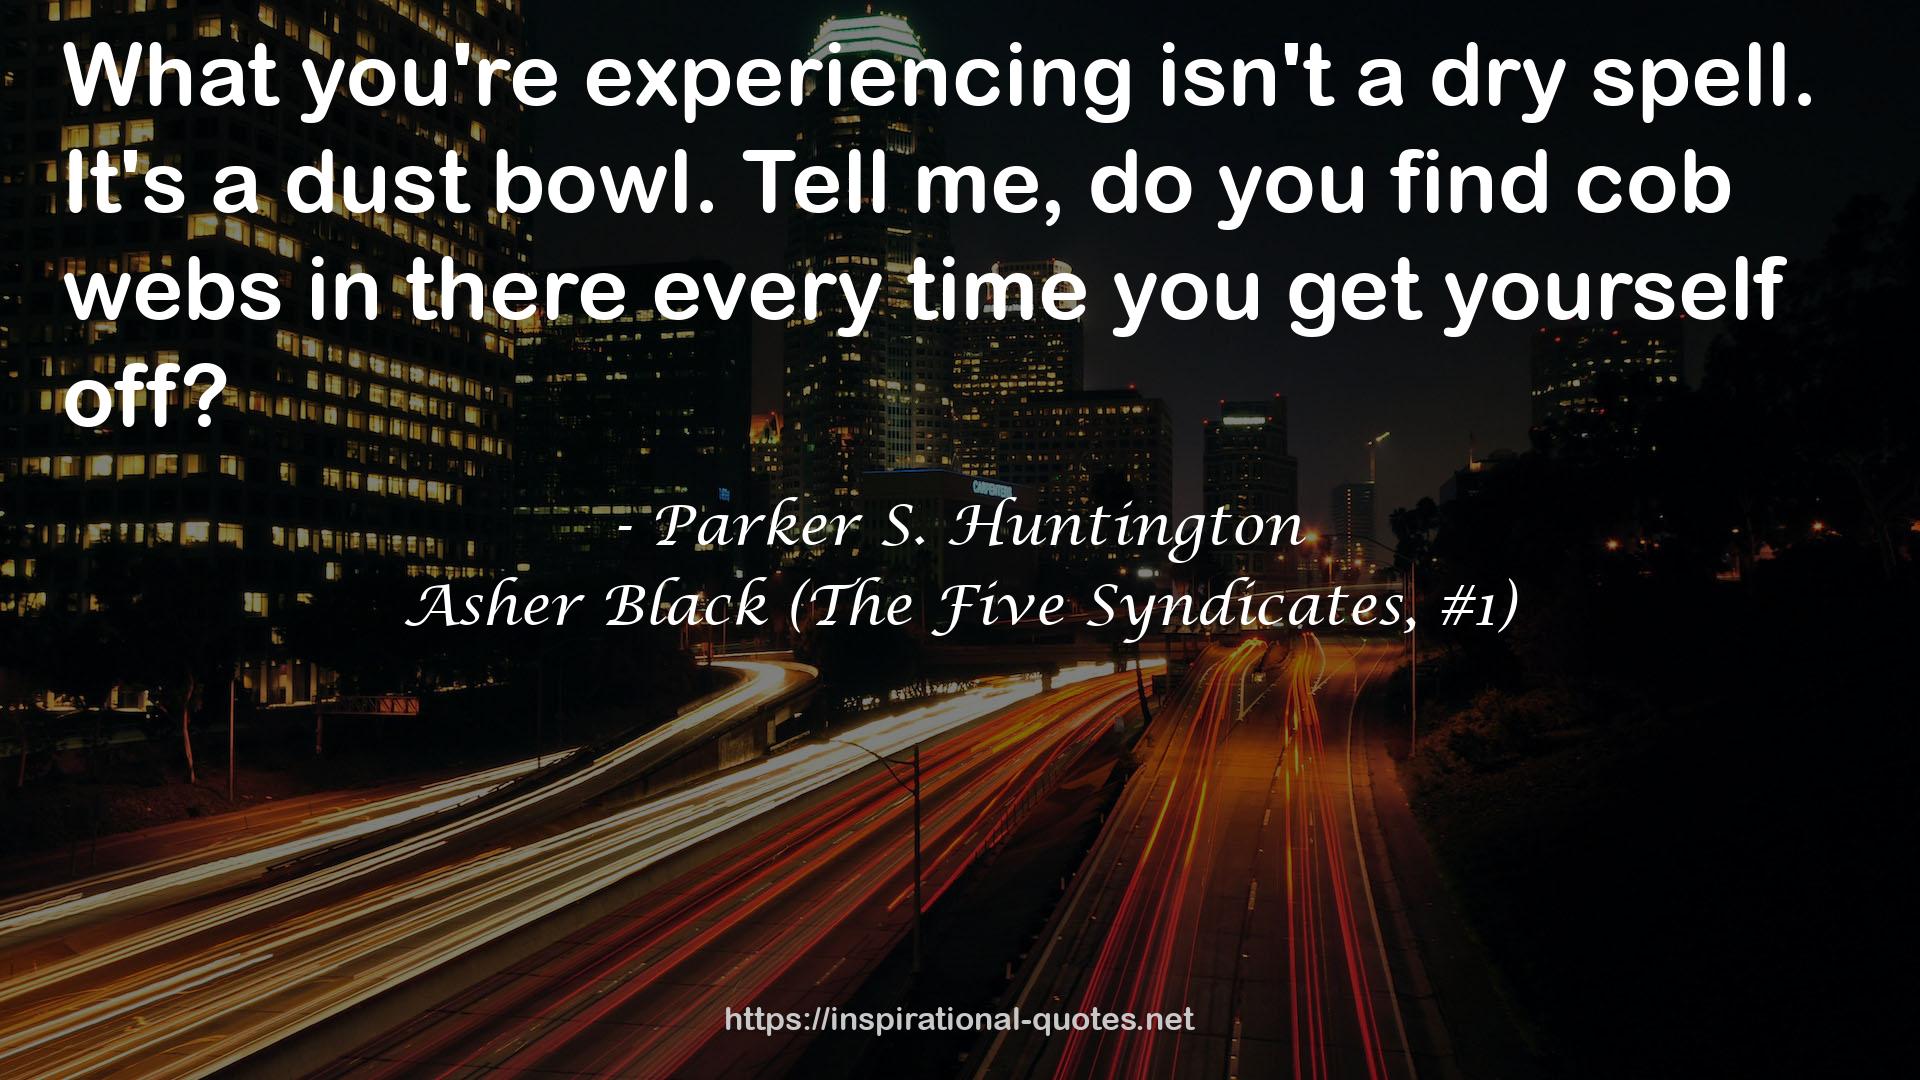 Asher Black (The Five Syndicates, #1) QUOTES